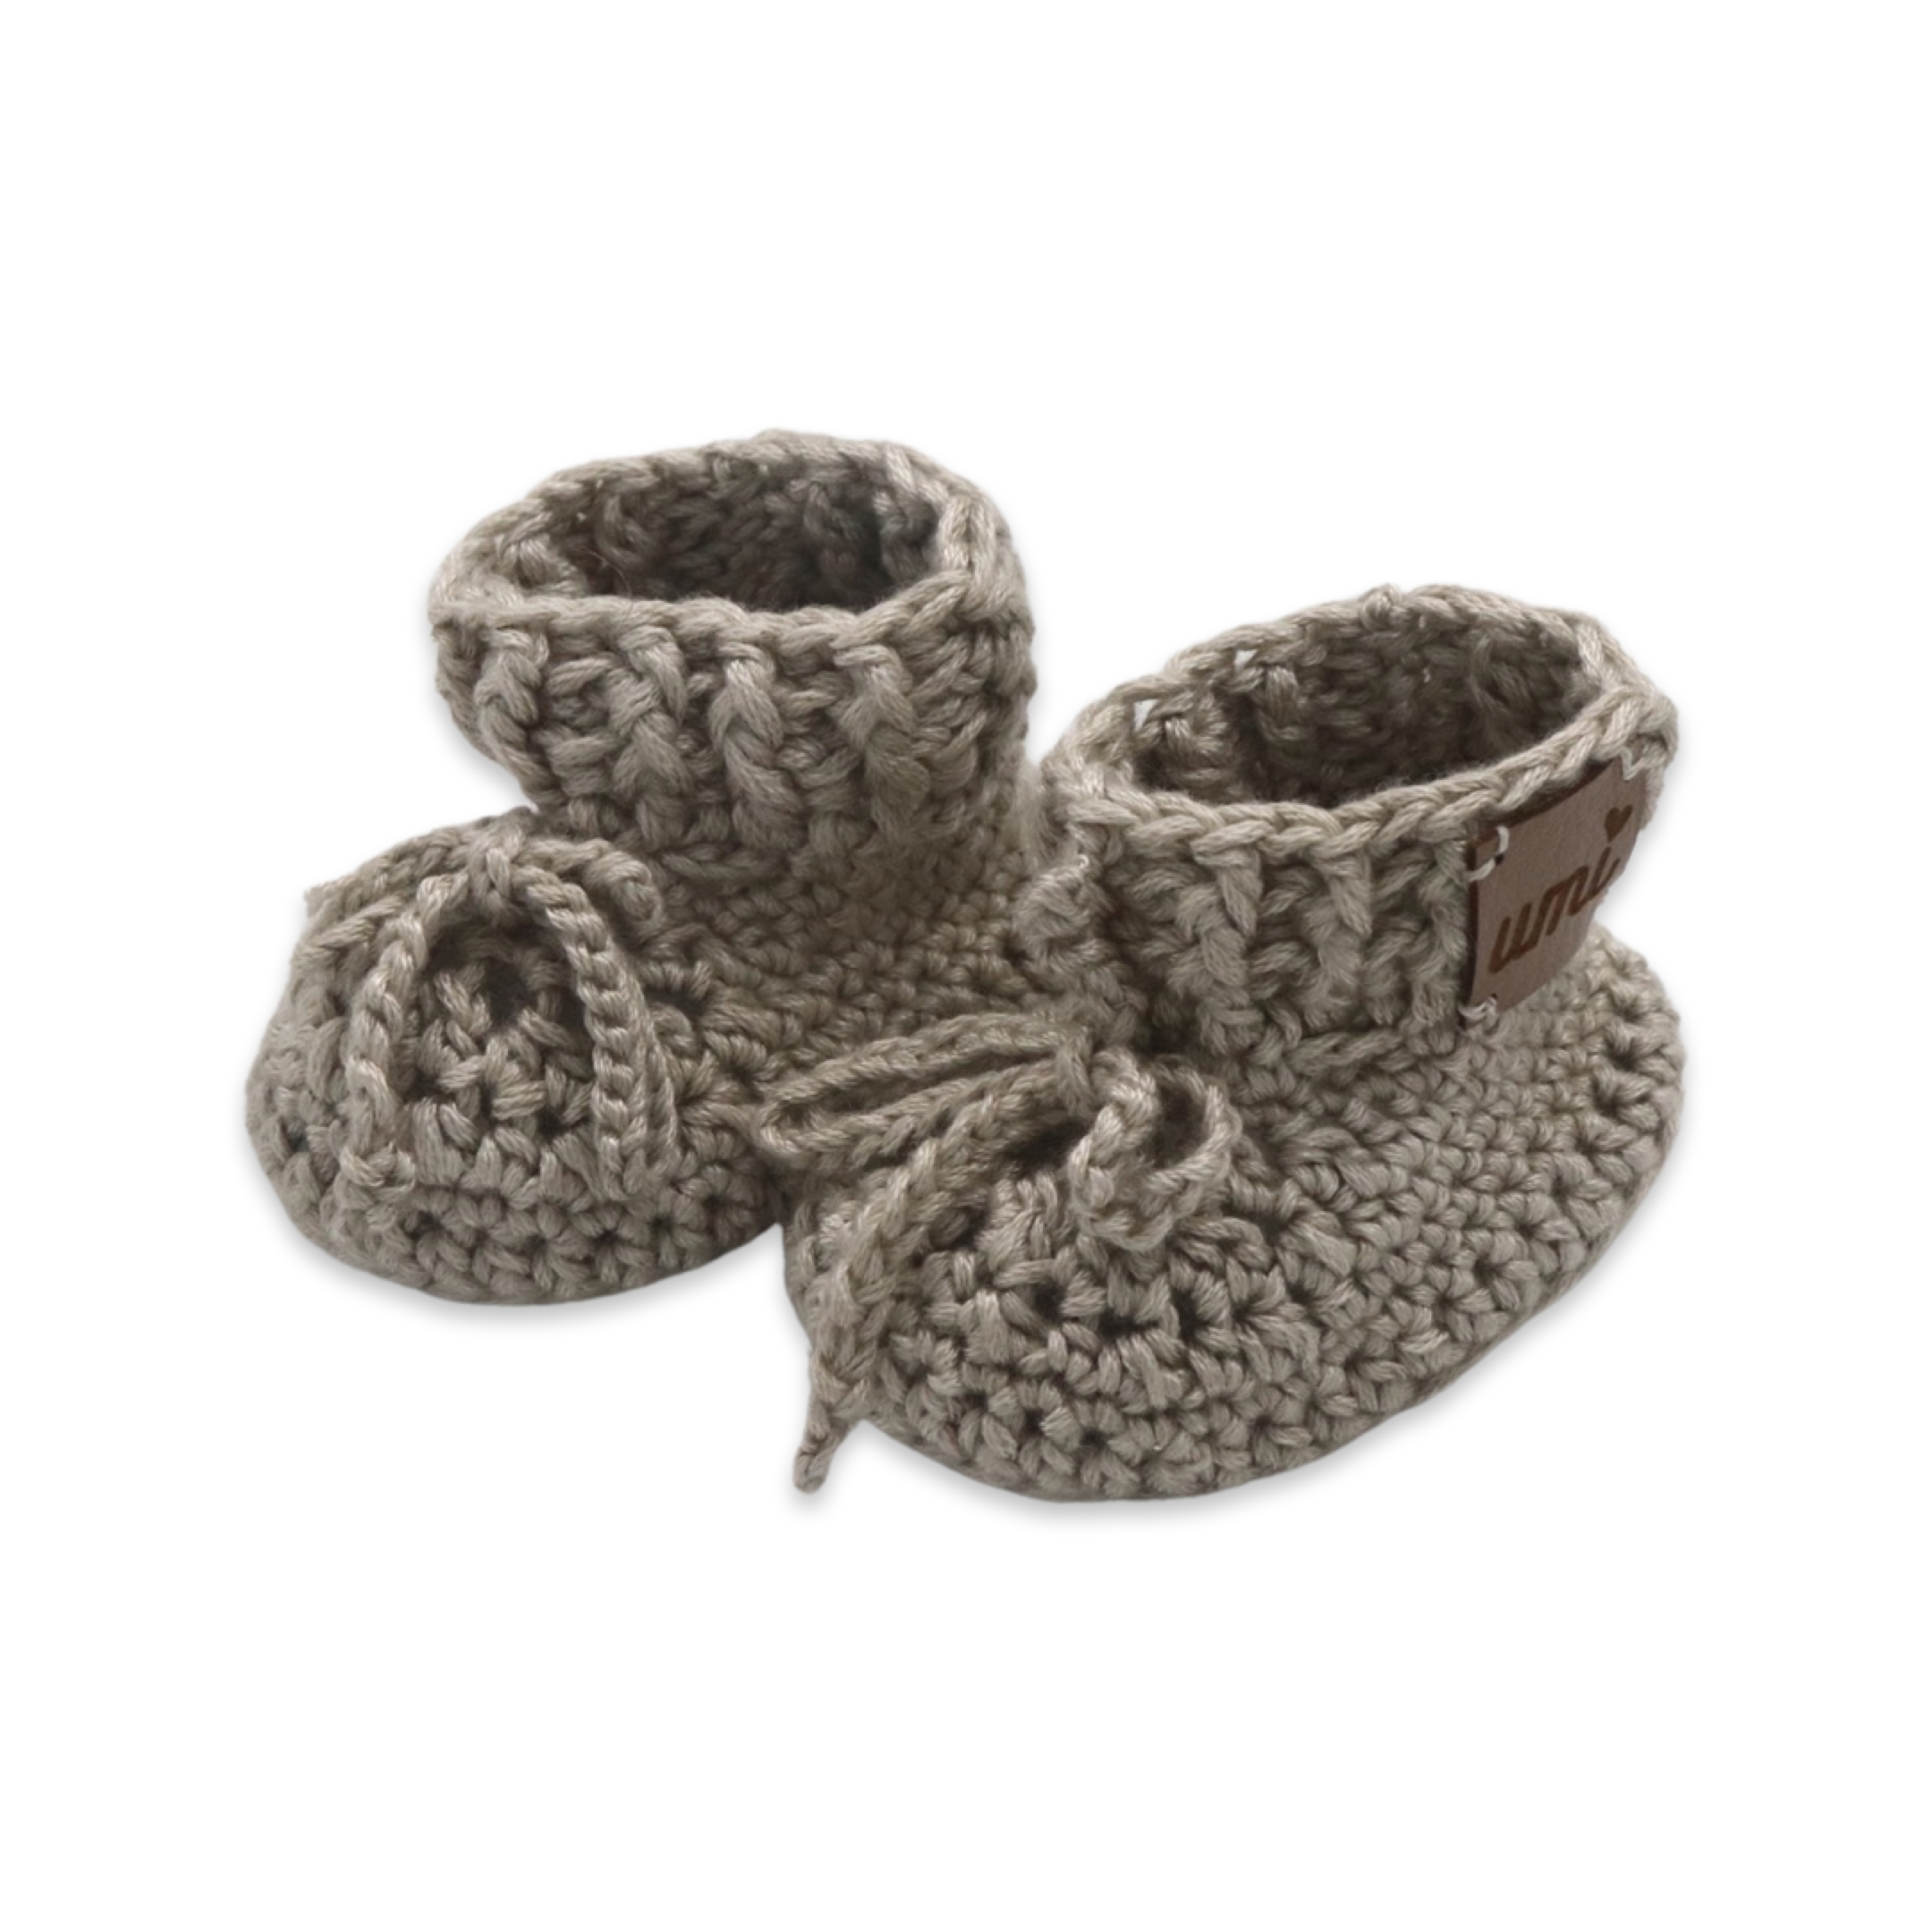 Umi Knitted Booties (0-3 Months) - Bubbadue